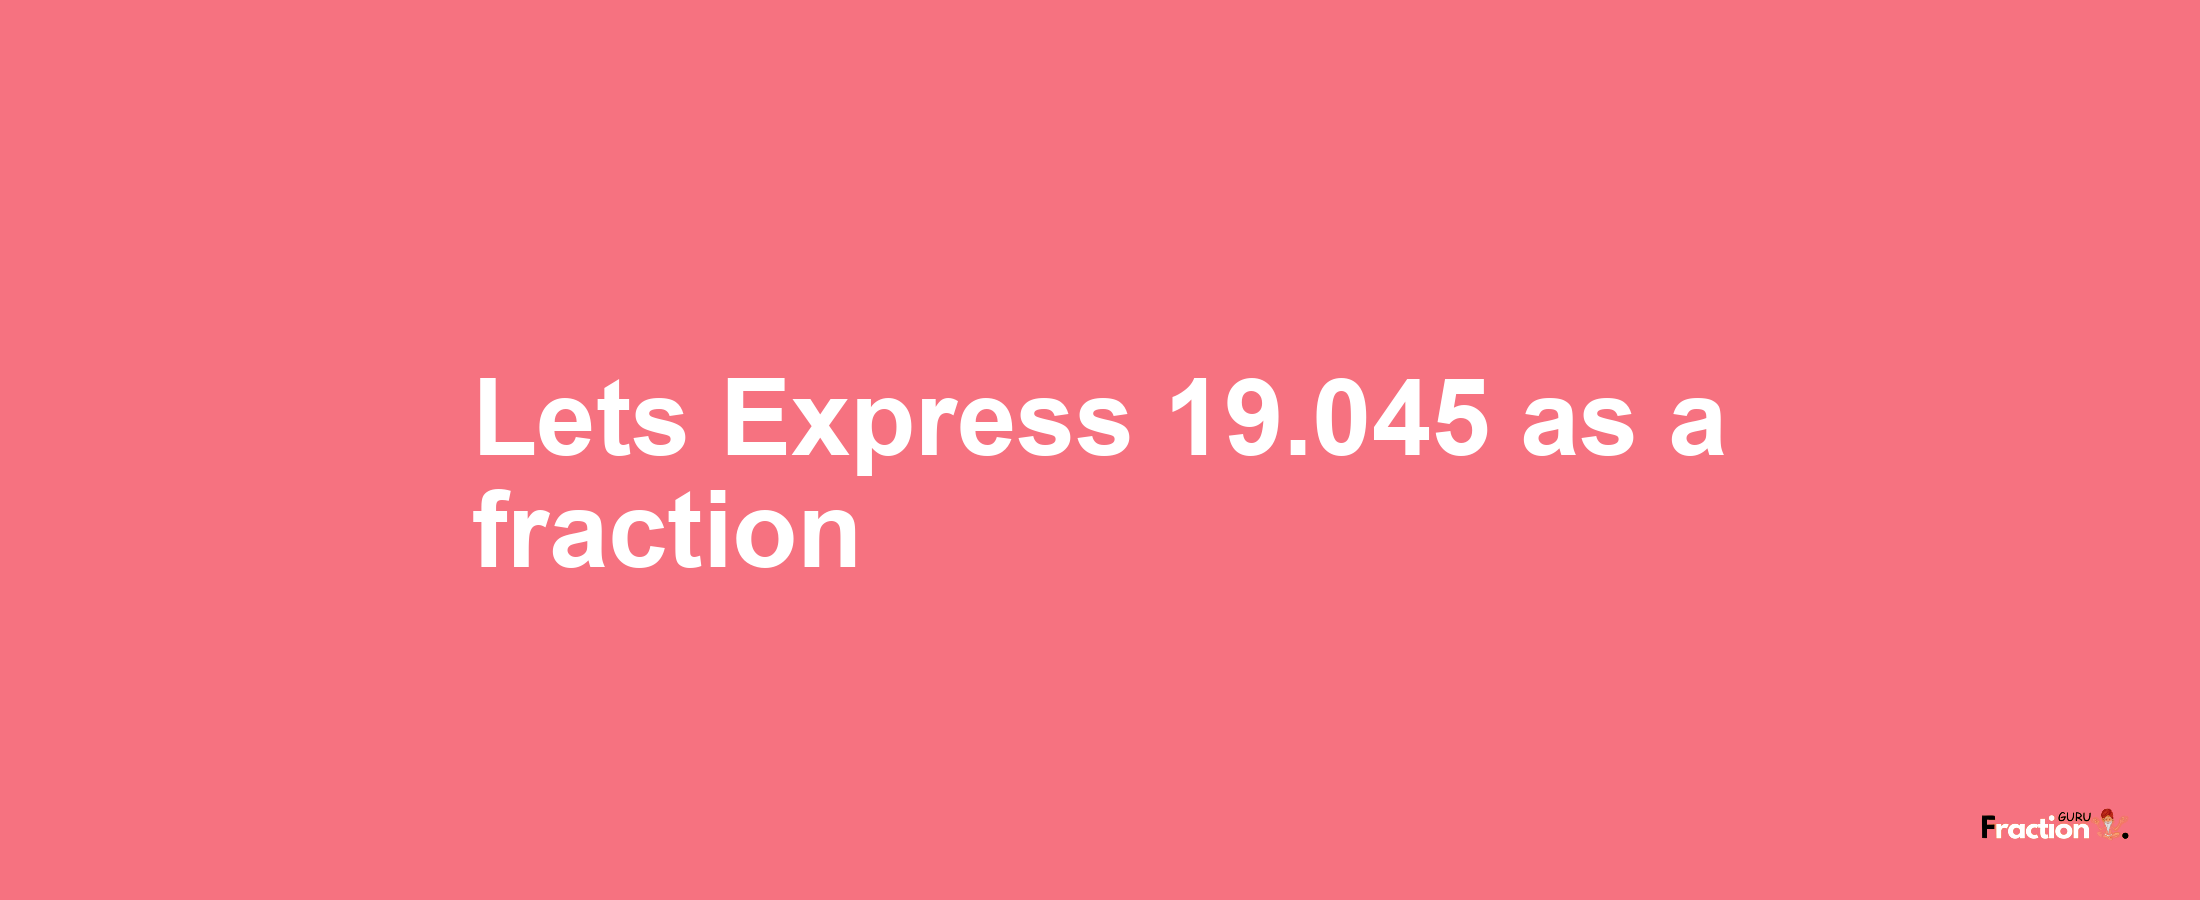 Lets Express 19.045 as afraction